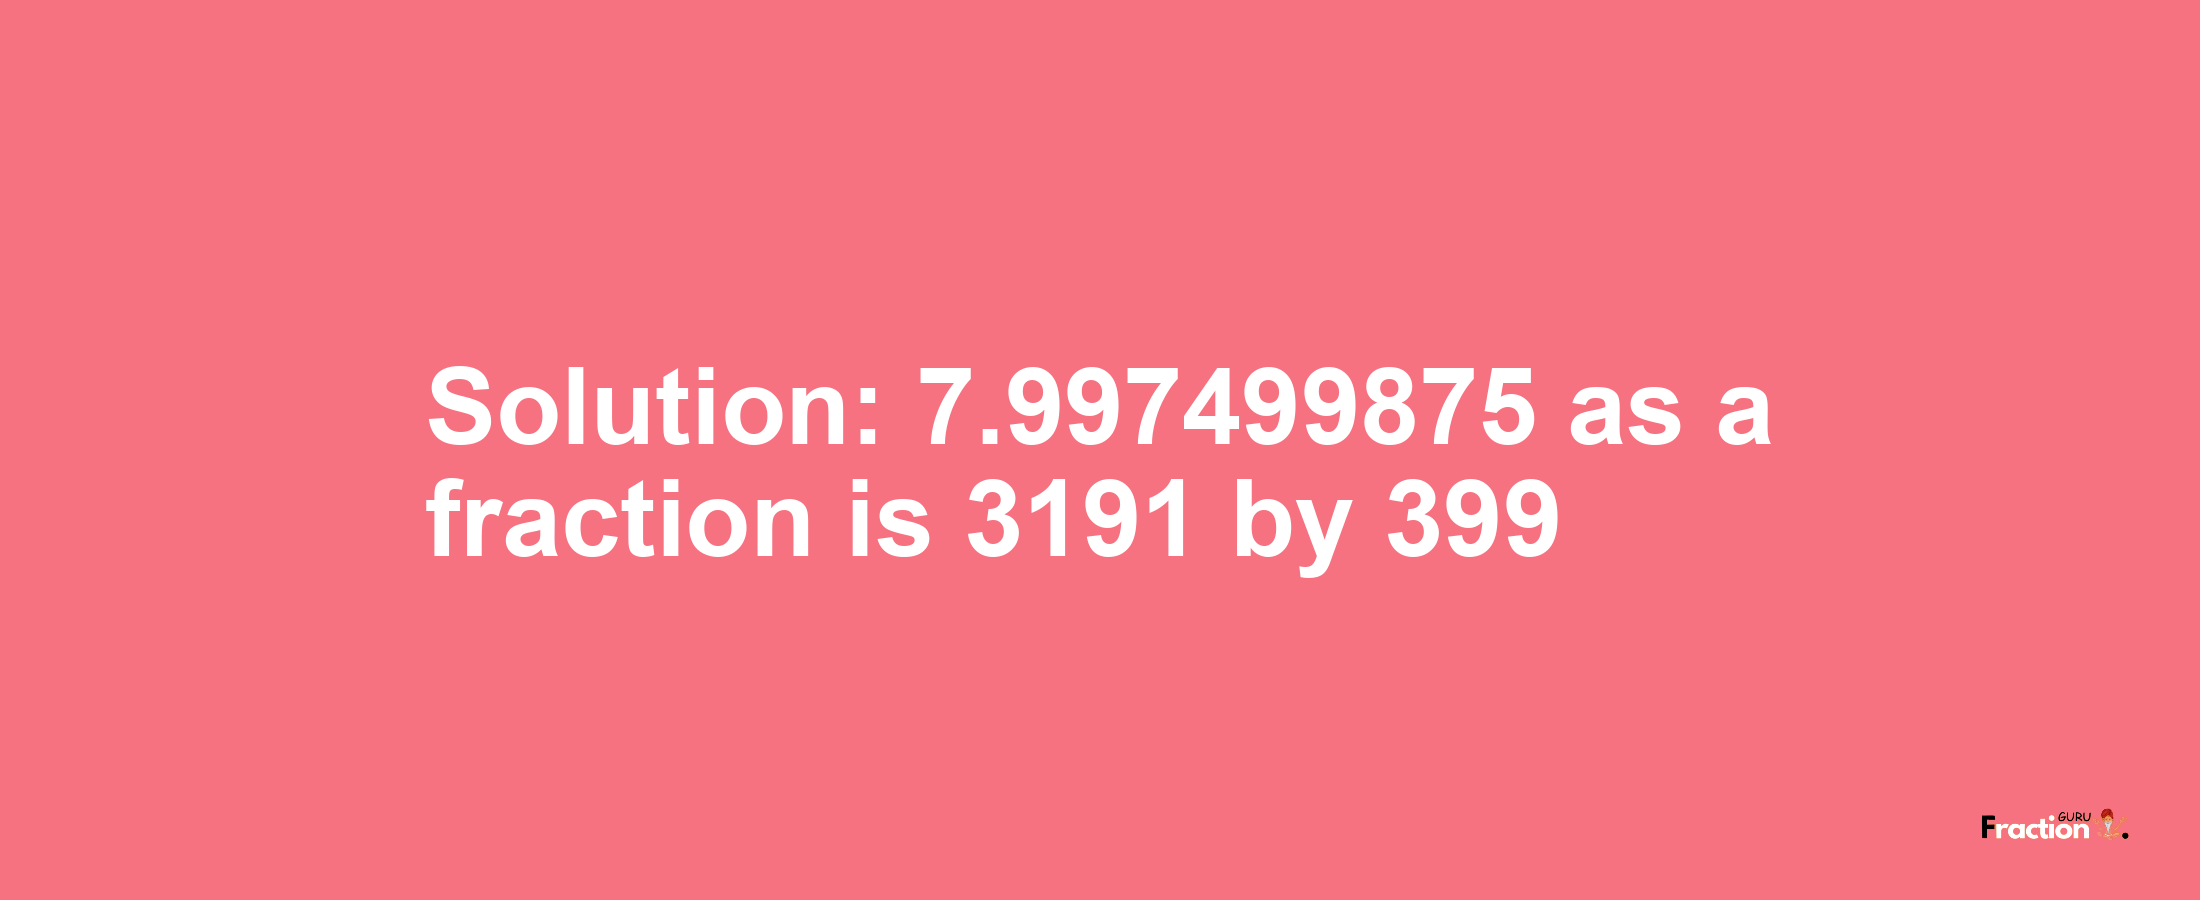 Solution:7.997499875 as a fraction is 3191/399